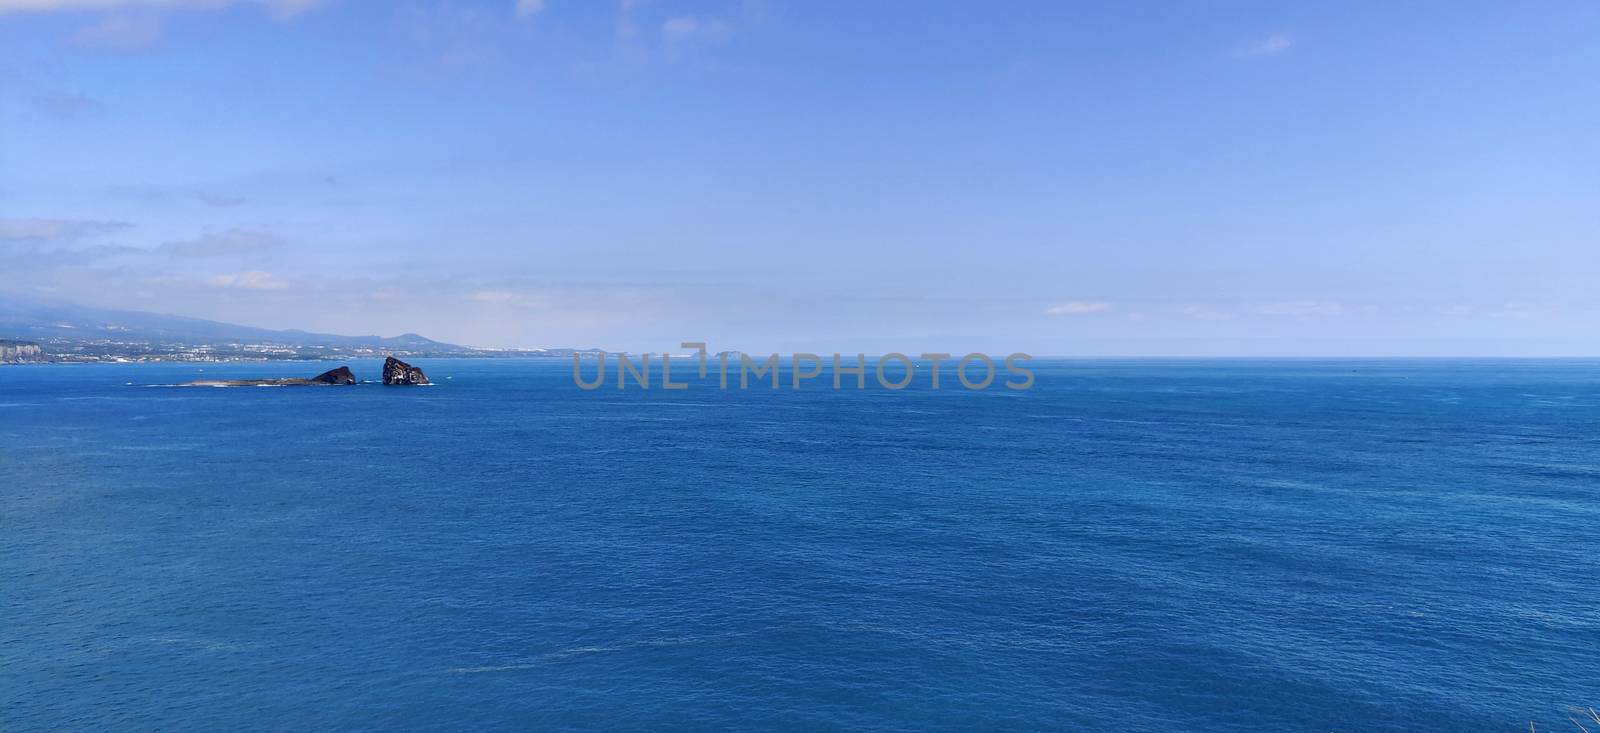 Wide angle shot of the brightest blue empty ocean and sky in Jeju Island, South Korea